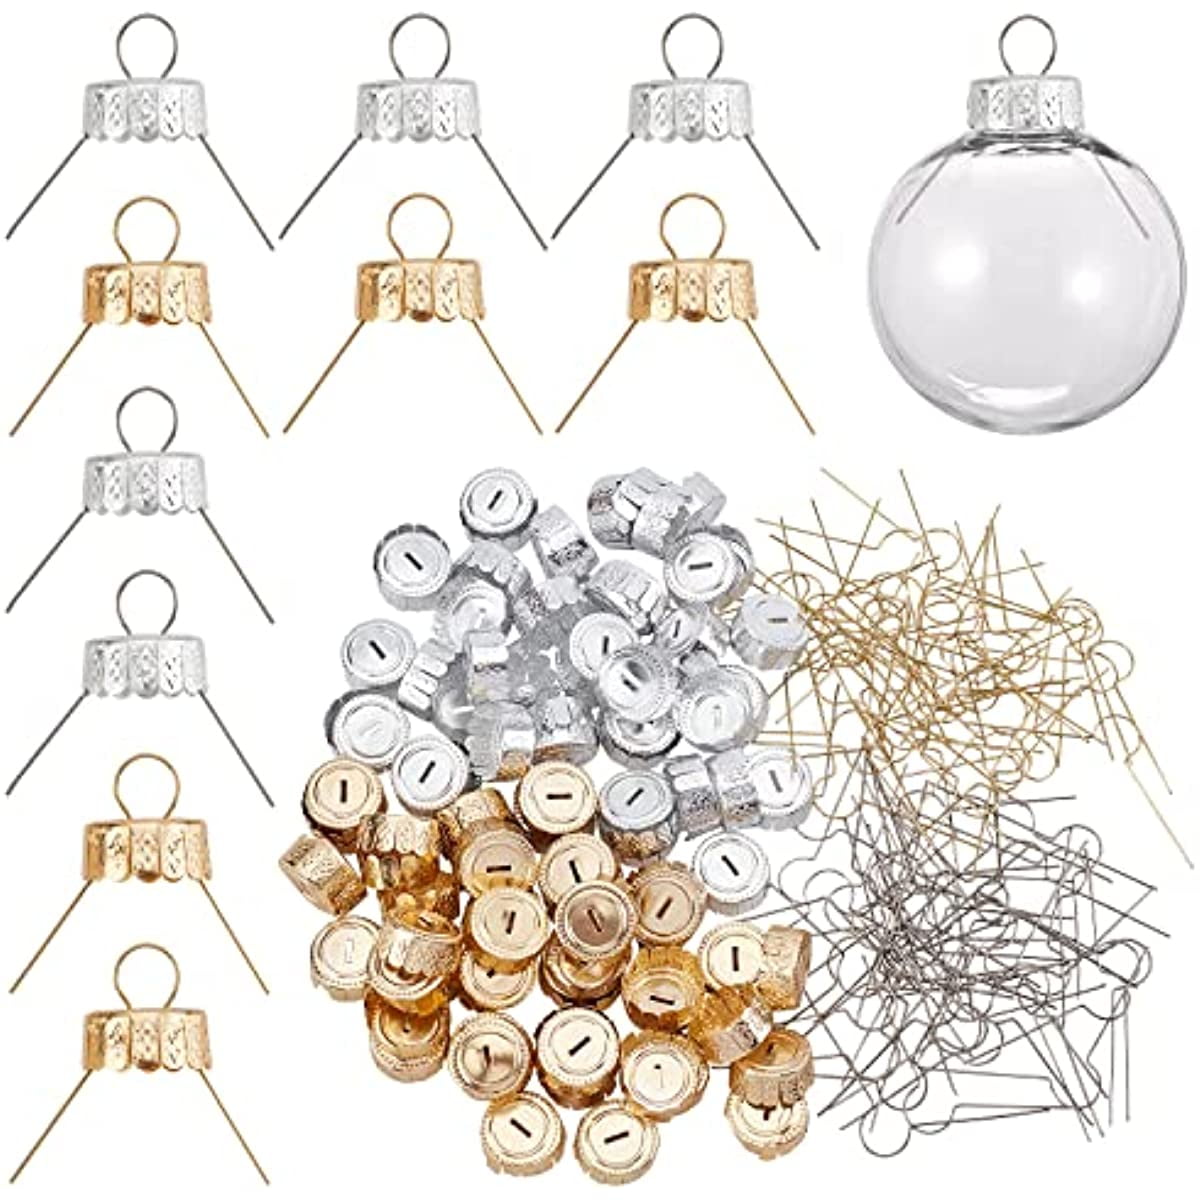  100Pcs Round Ornament Caps Replacement Christmas Ornament Metal  Hangers Caps and Hangers String Set for Christmas Tree Ceramic Glass  Porcelain Christmas Ornaments DIY Decorations, Gold : Home & Kitchen